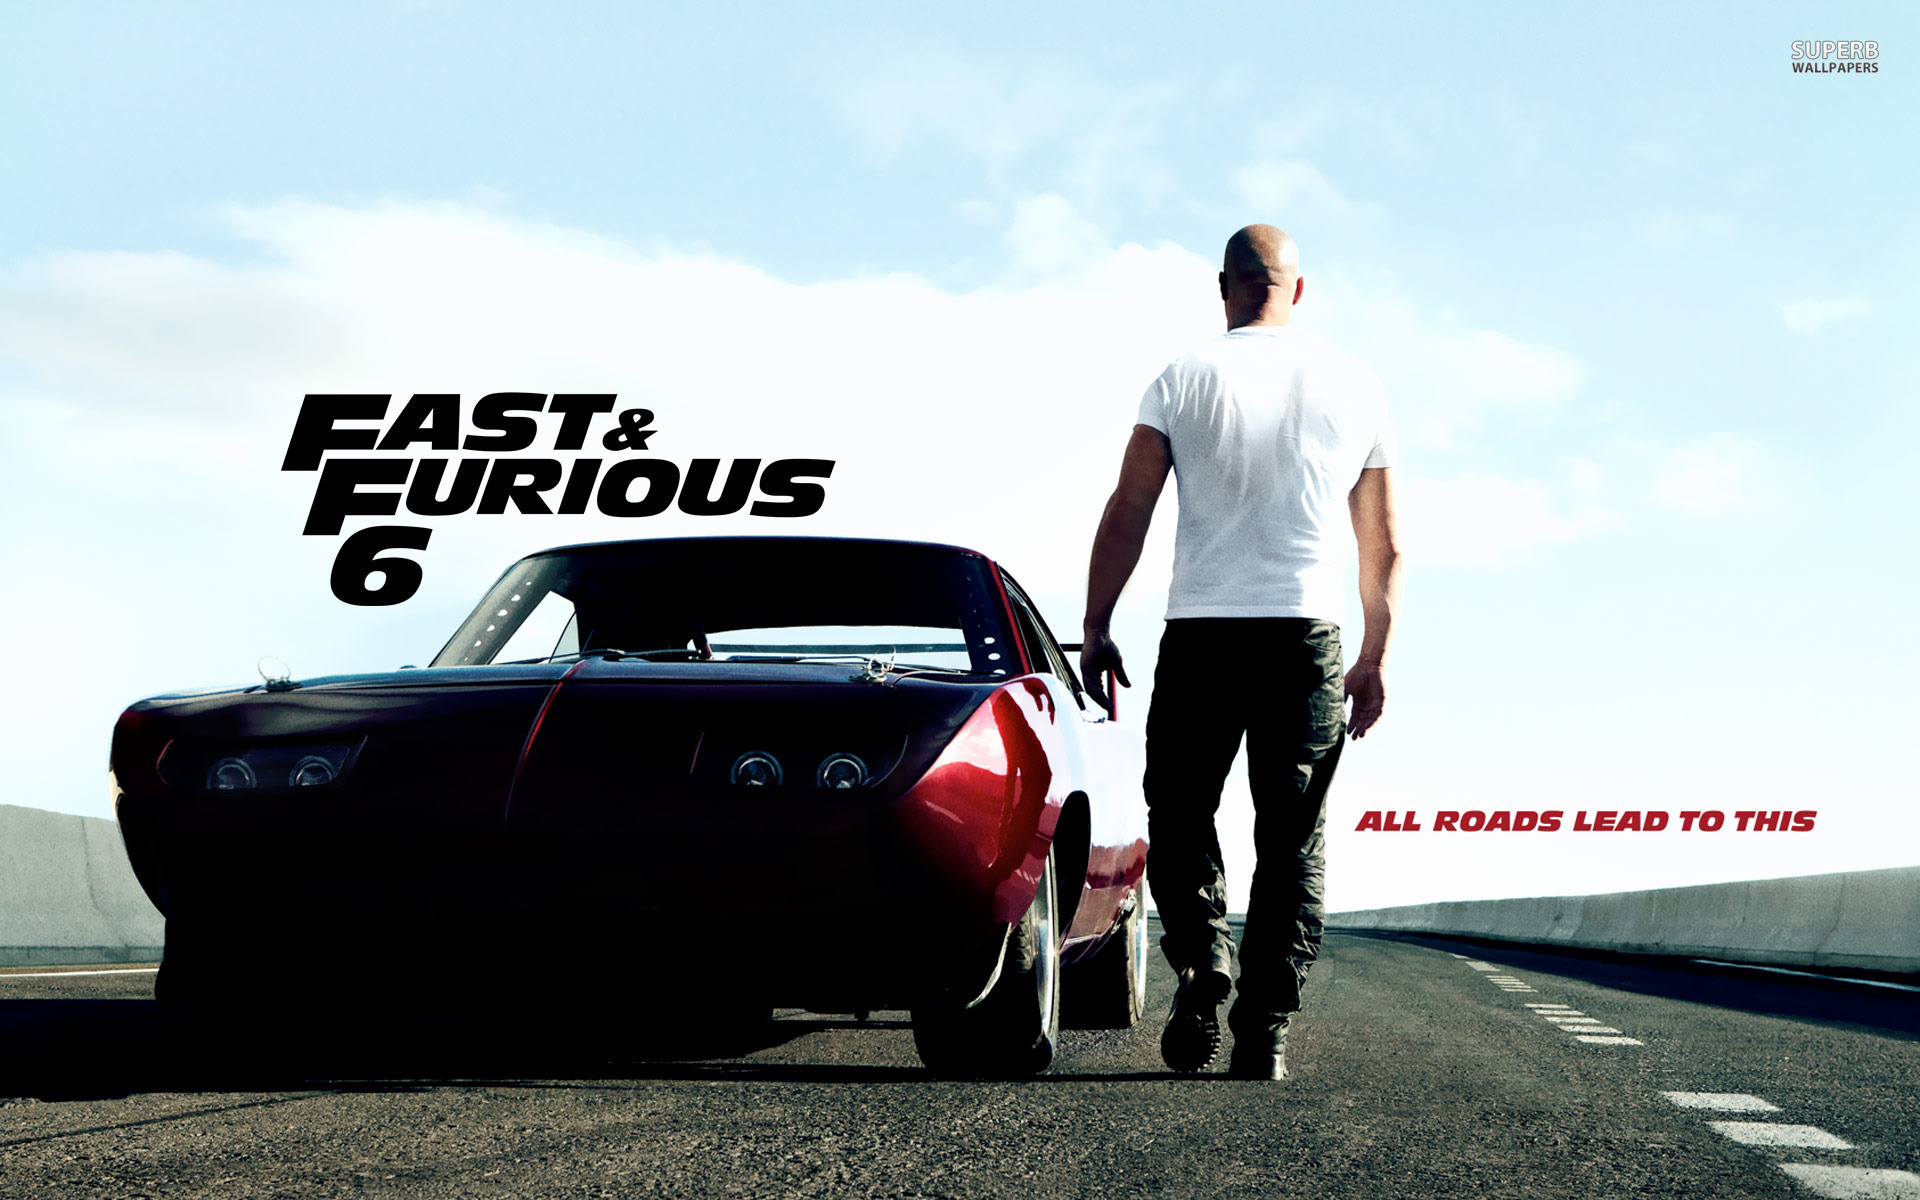 FAST FURIOUS 6 GET YOUR MOVIE REVIEW HERE